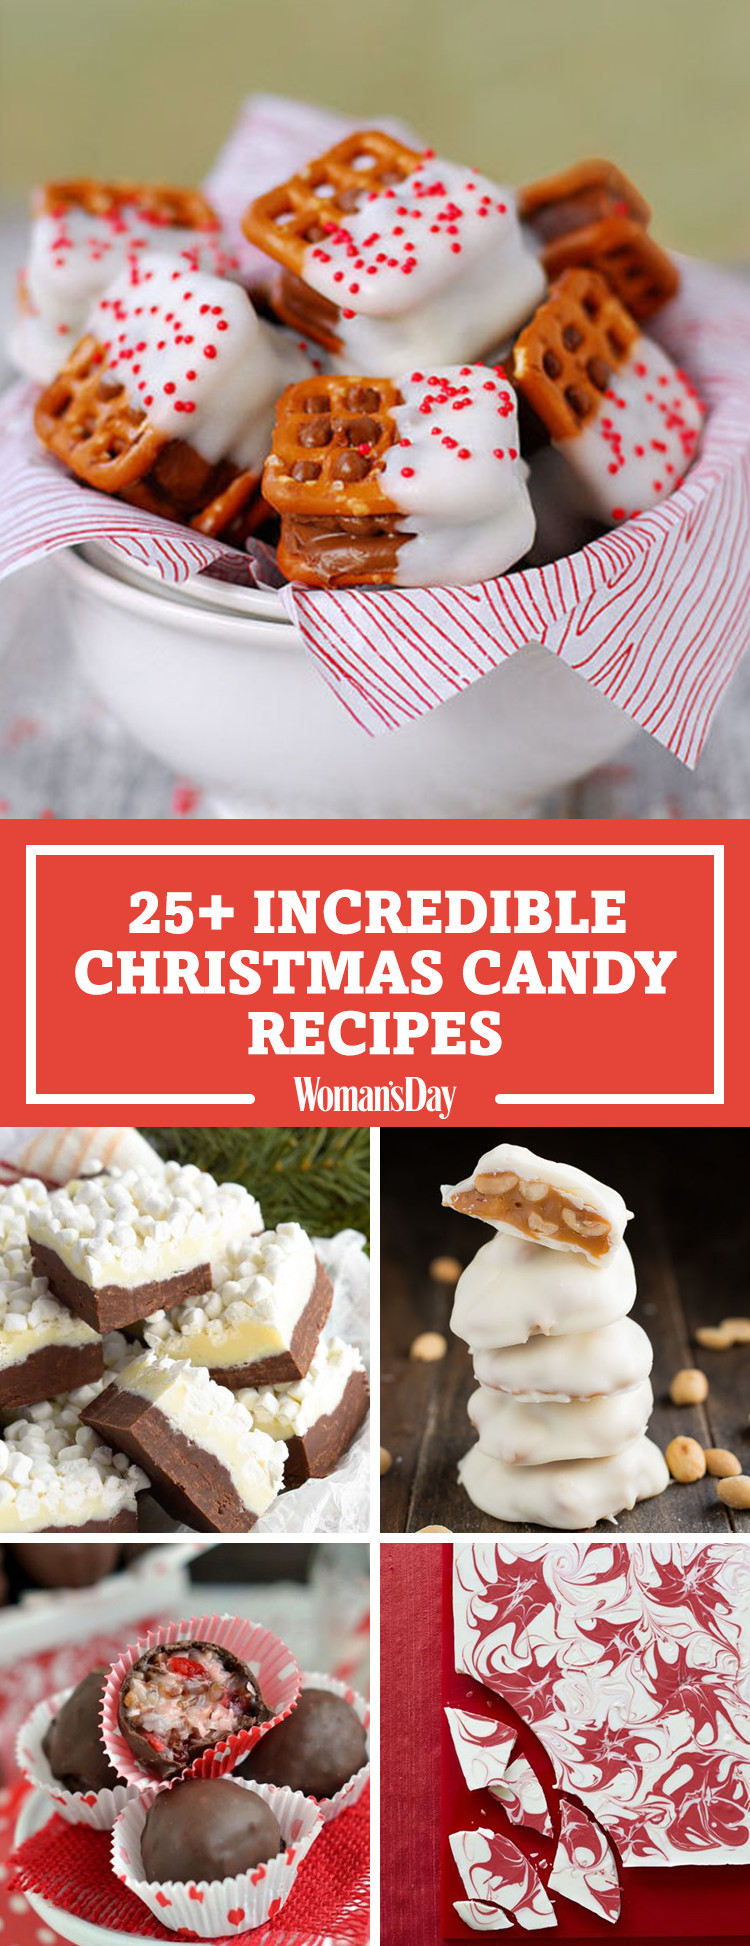 Christmas Candy Recipes
 28 Homemade Christmas Candy Recipes How To Make Your Own